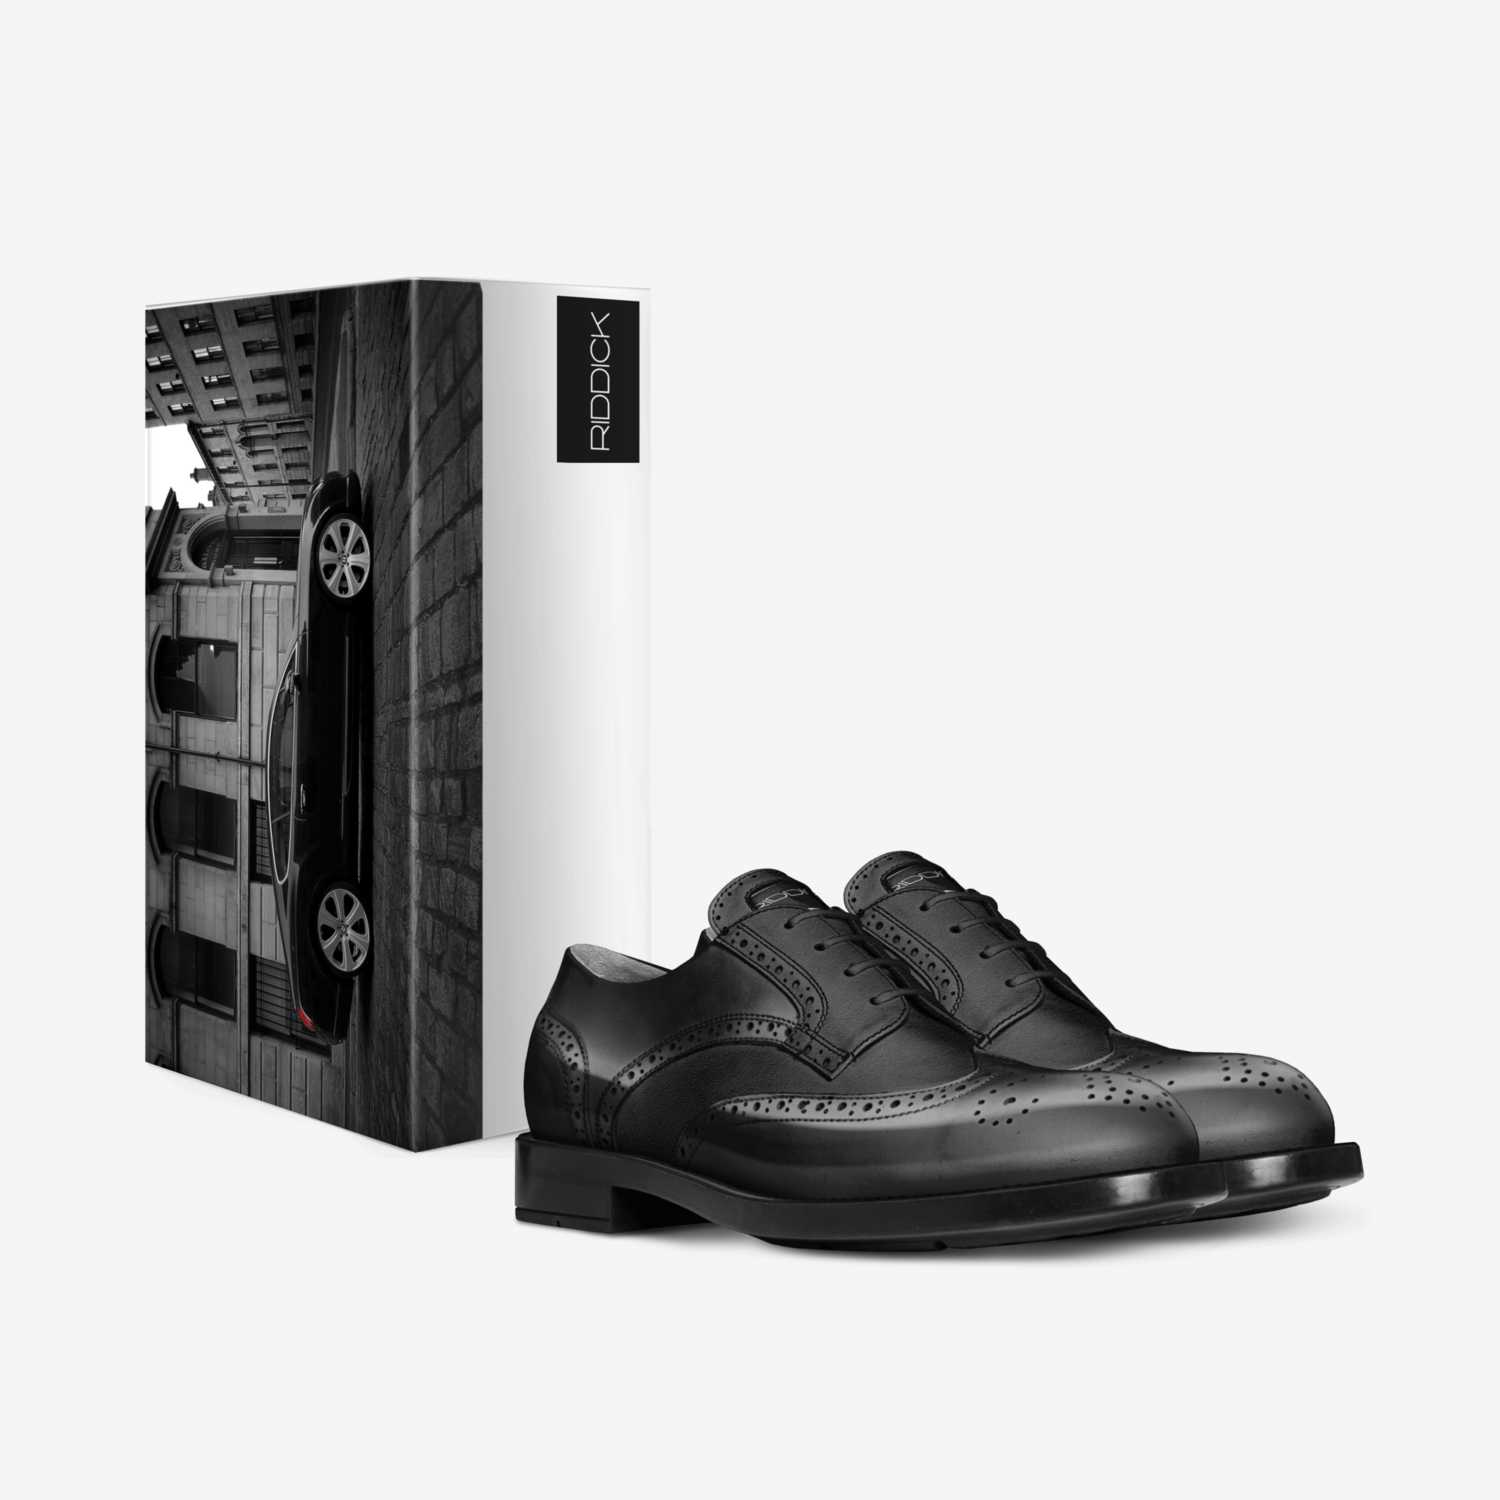 Black Beauty custom made in Italy shoes by Haden Riddick | Box view